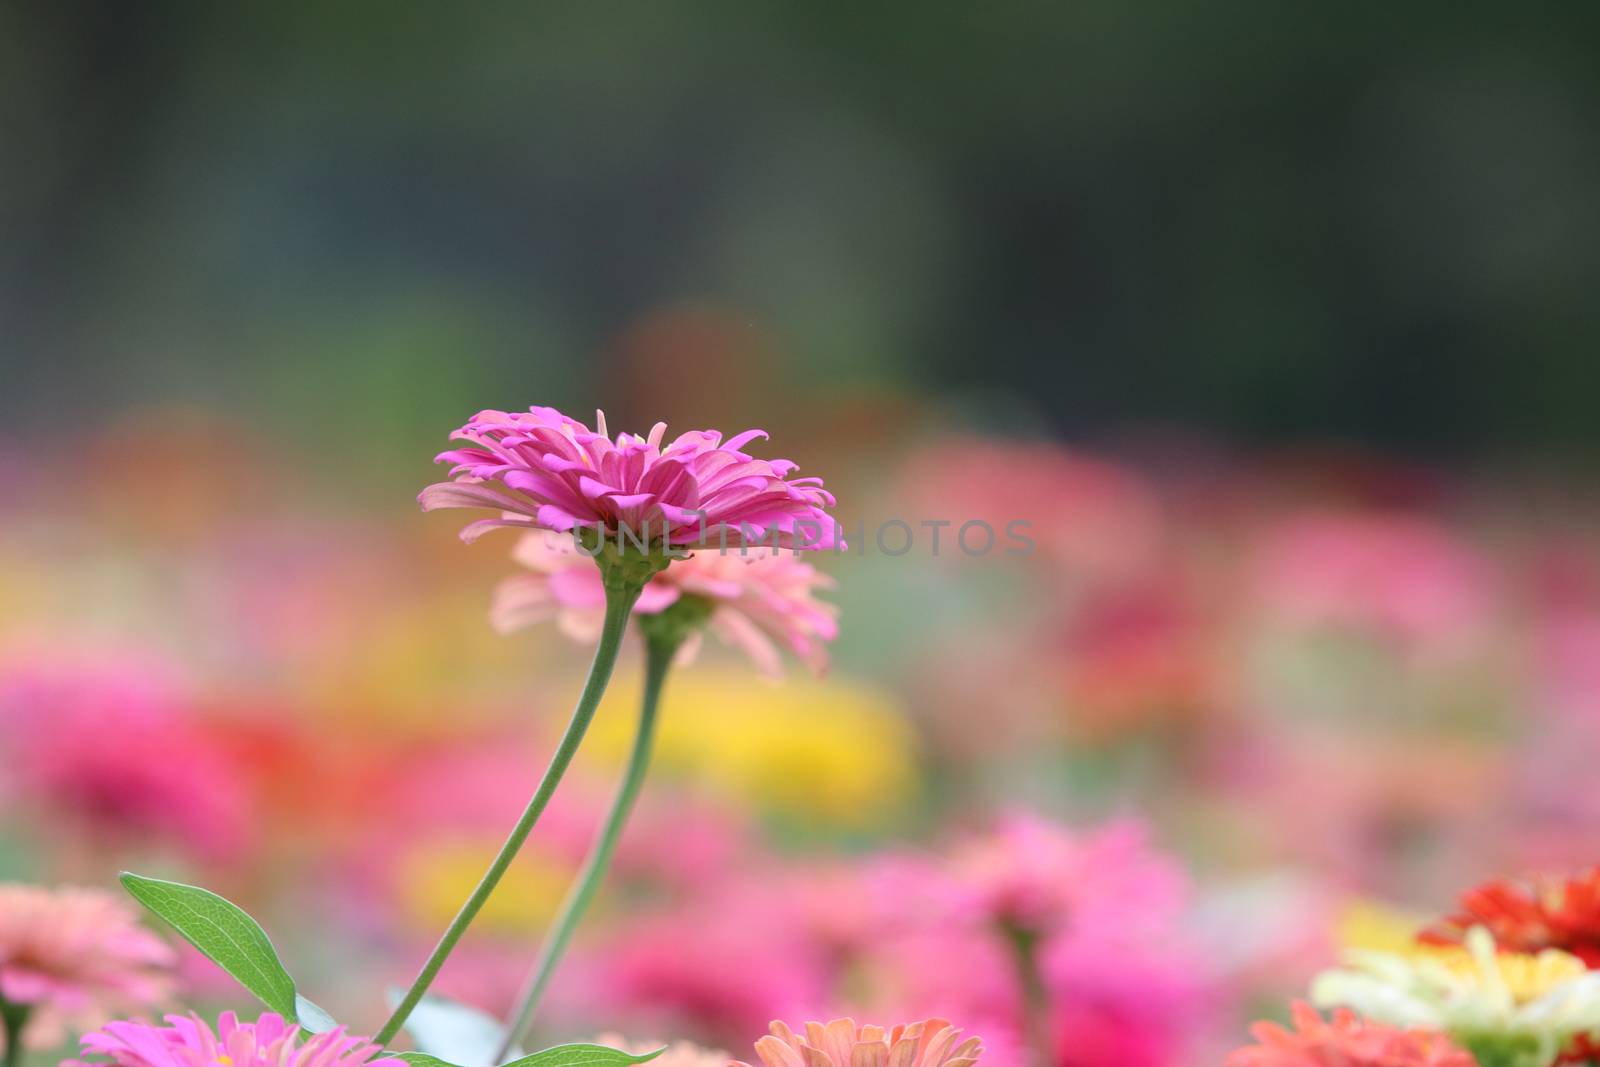 Pink Zinnia Elegans beauty in nature background soft and bright in summer at public park of Thailand